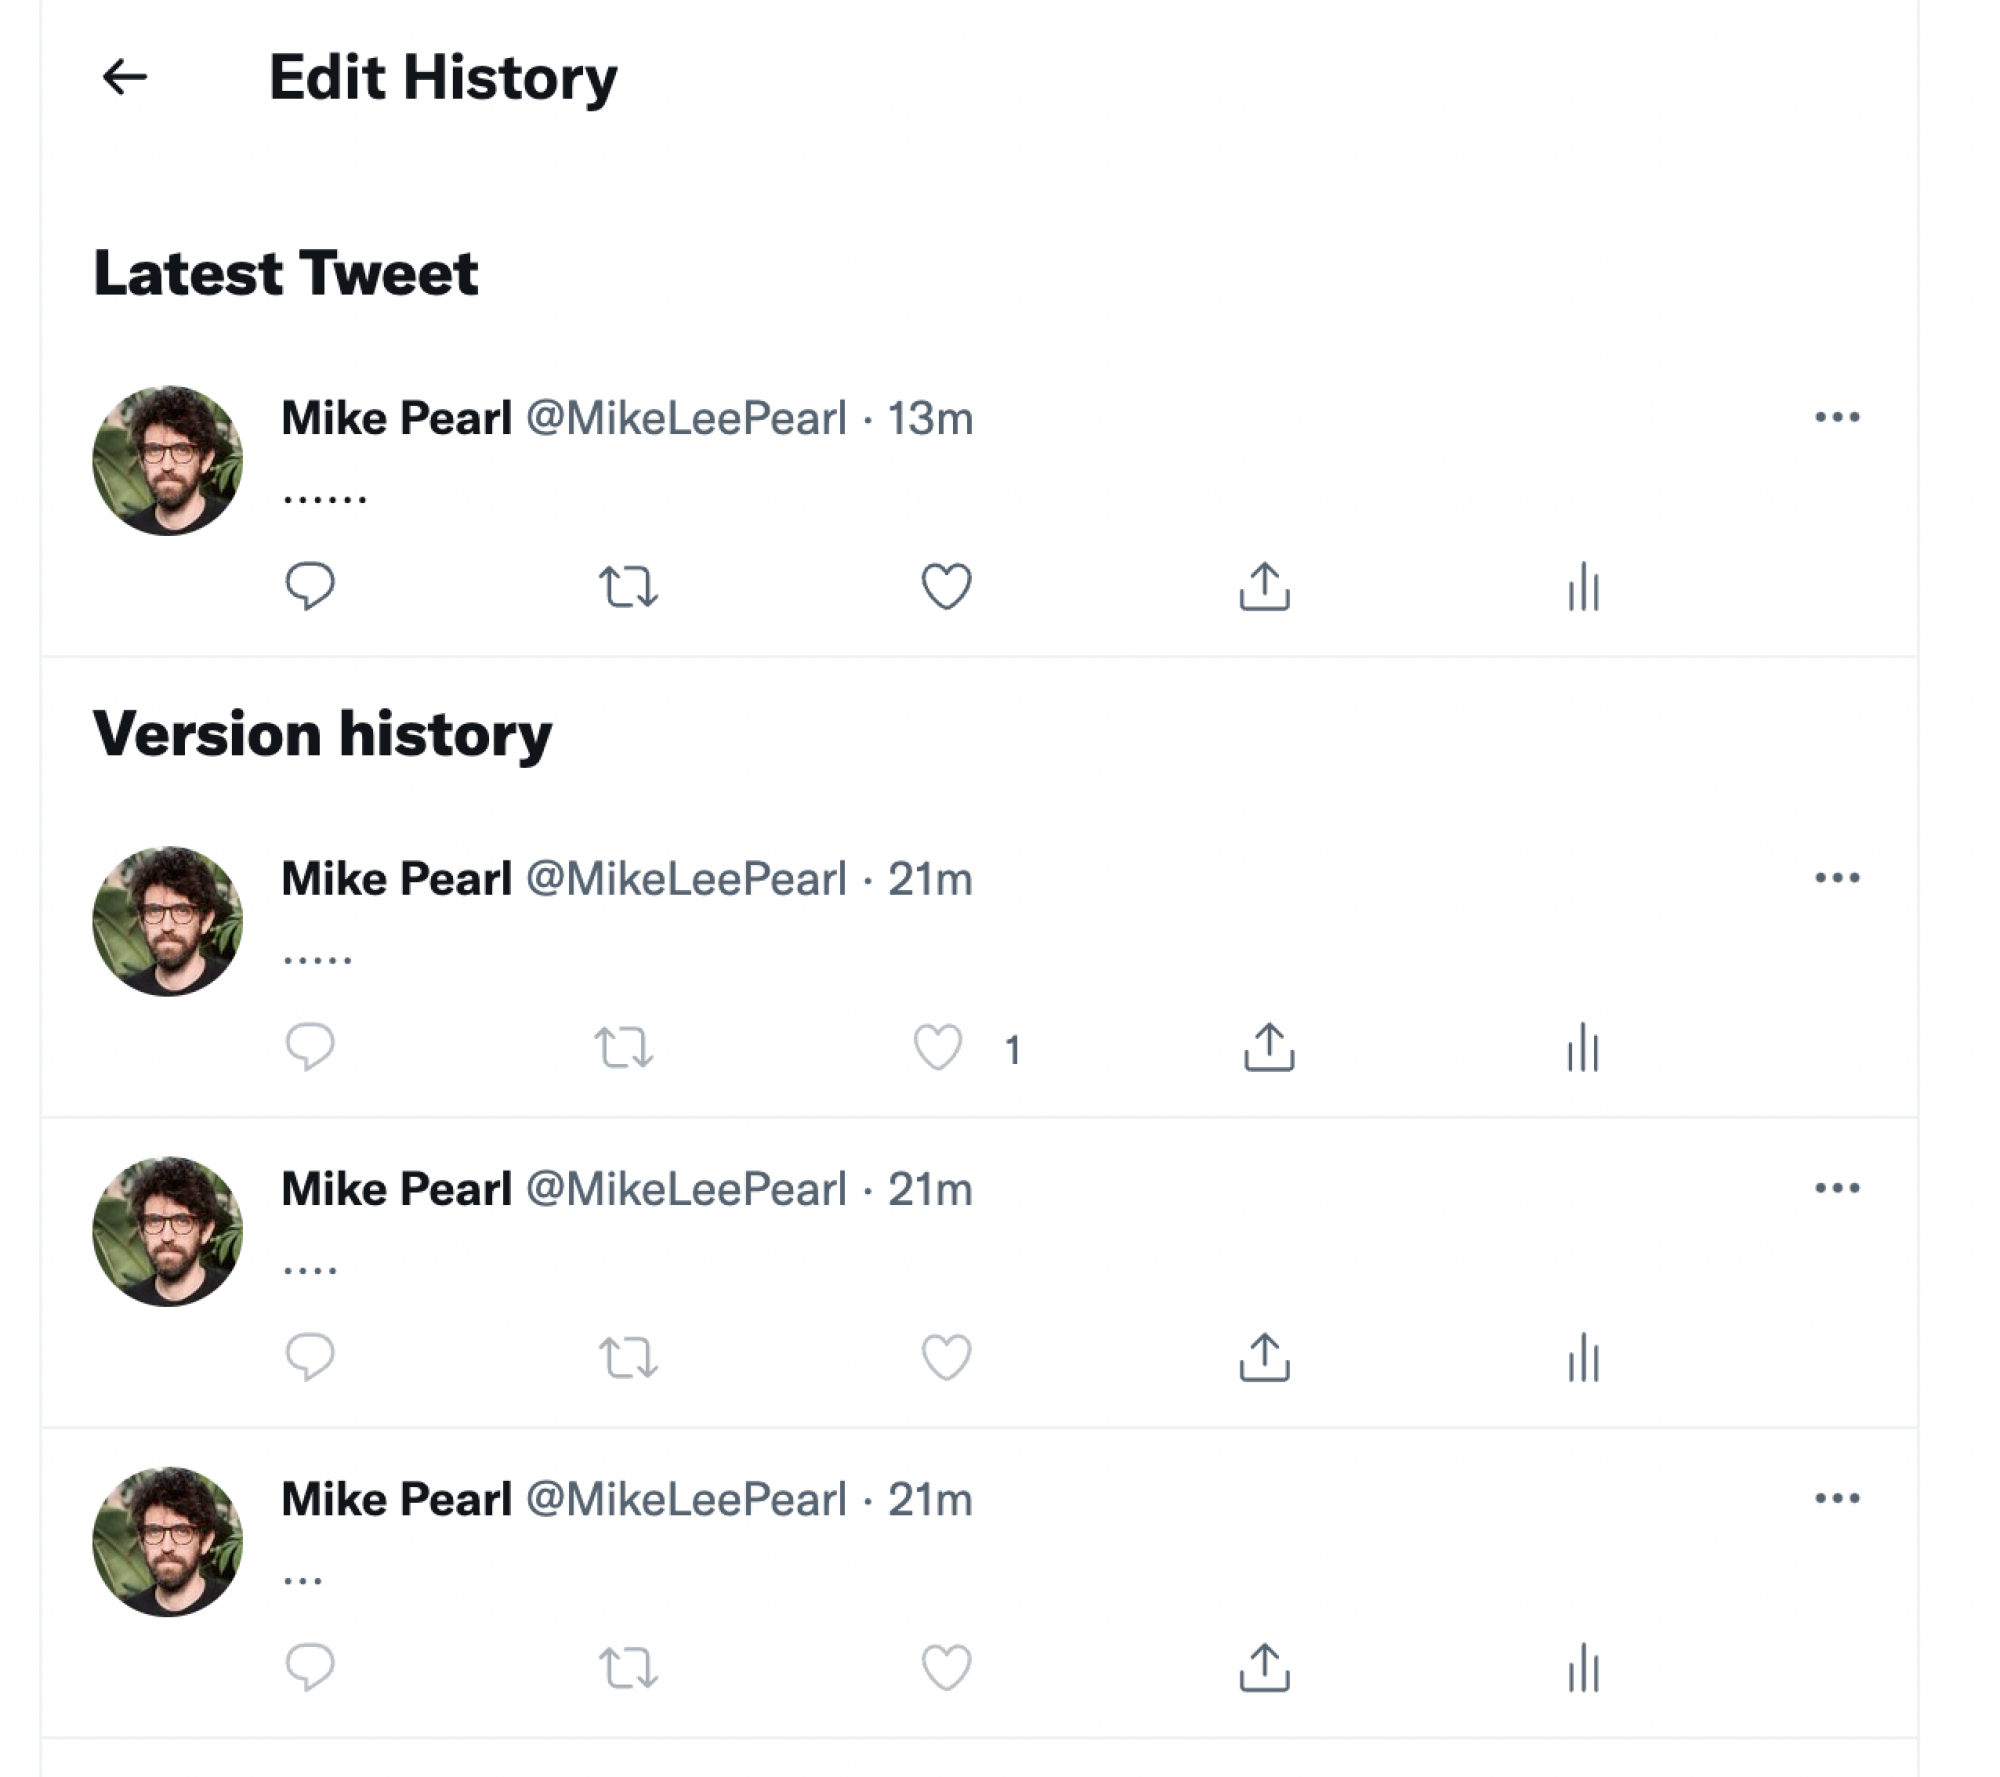 A version history of a tweet showing that the latest version actually received no likes.